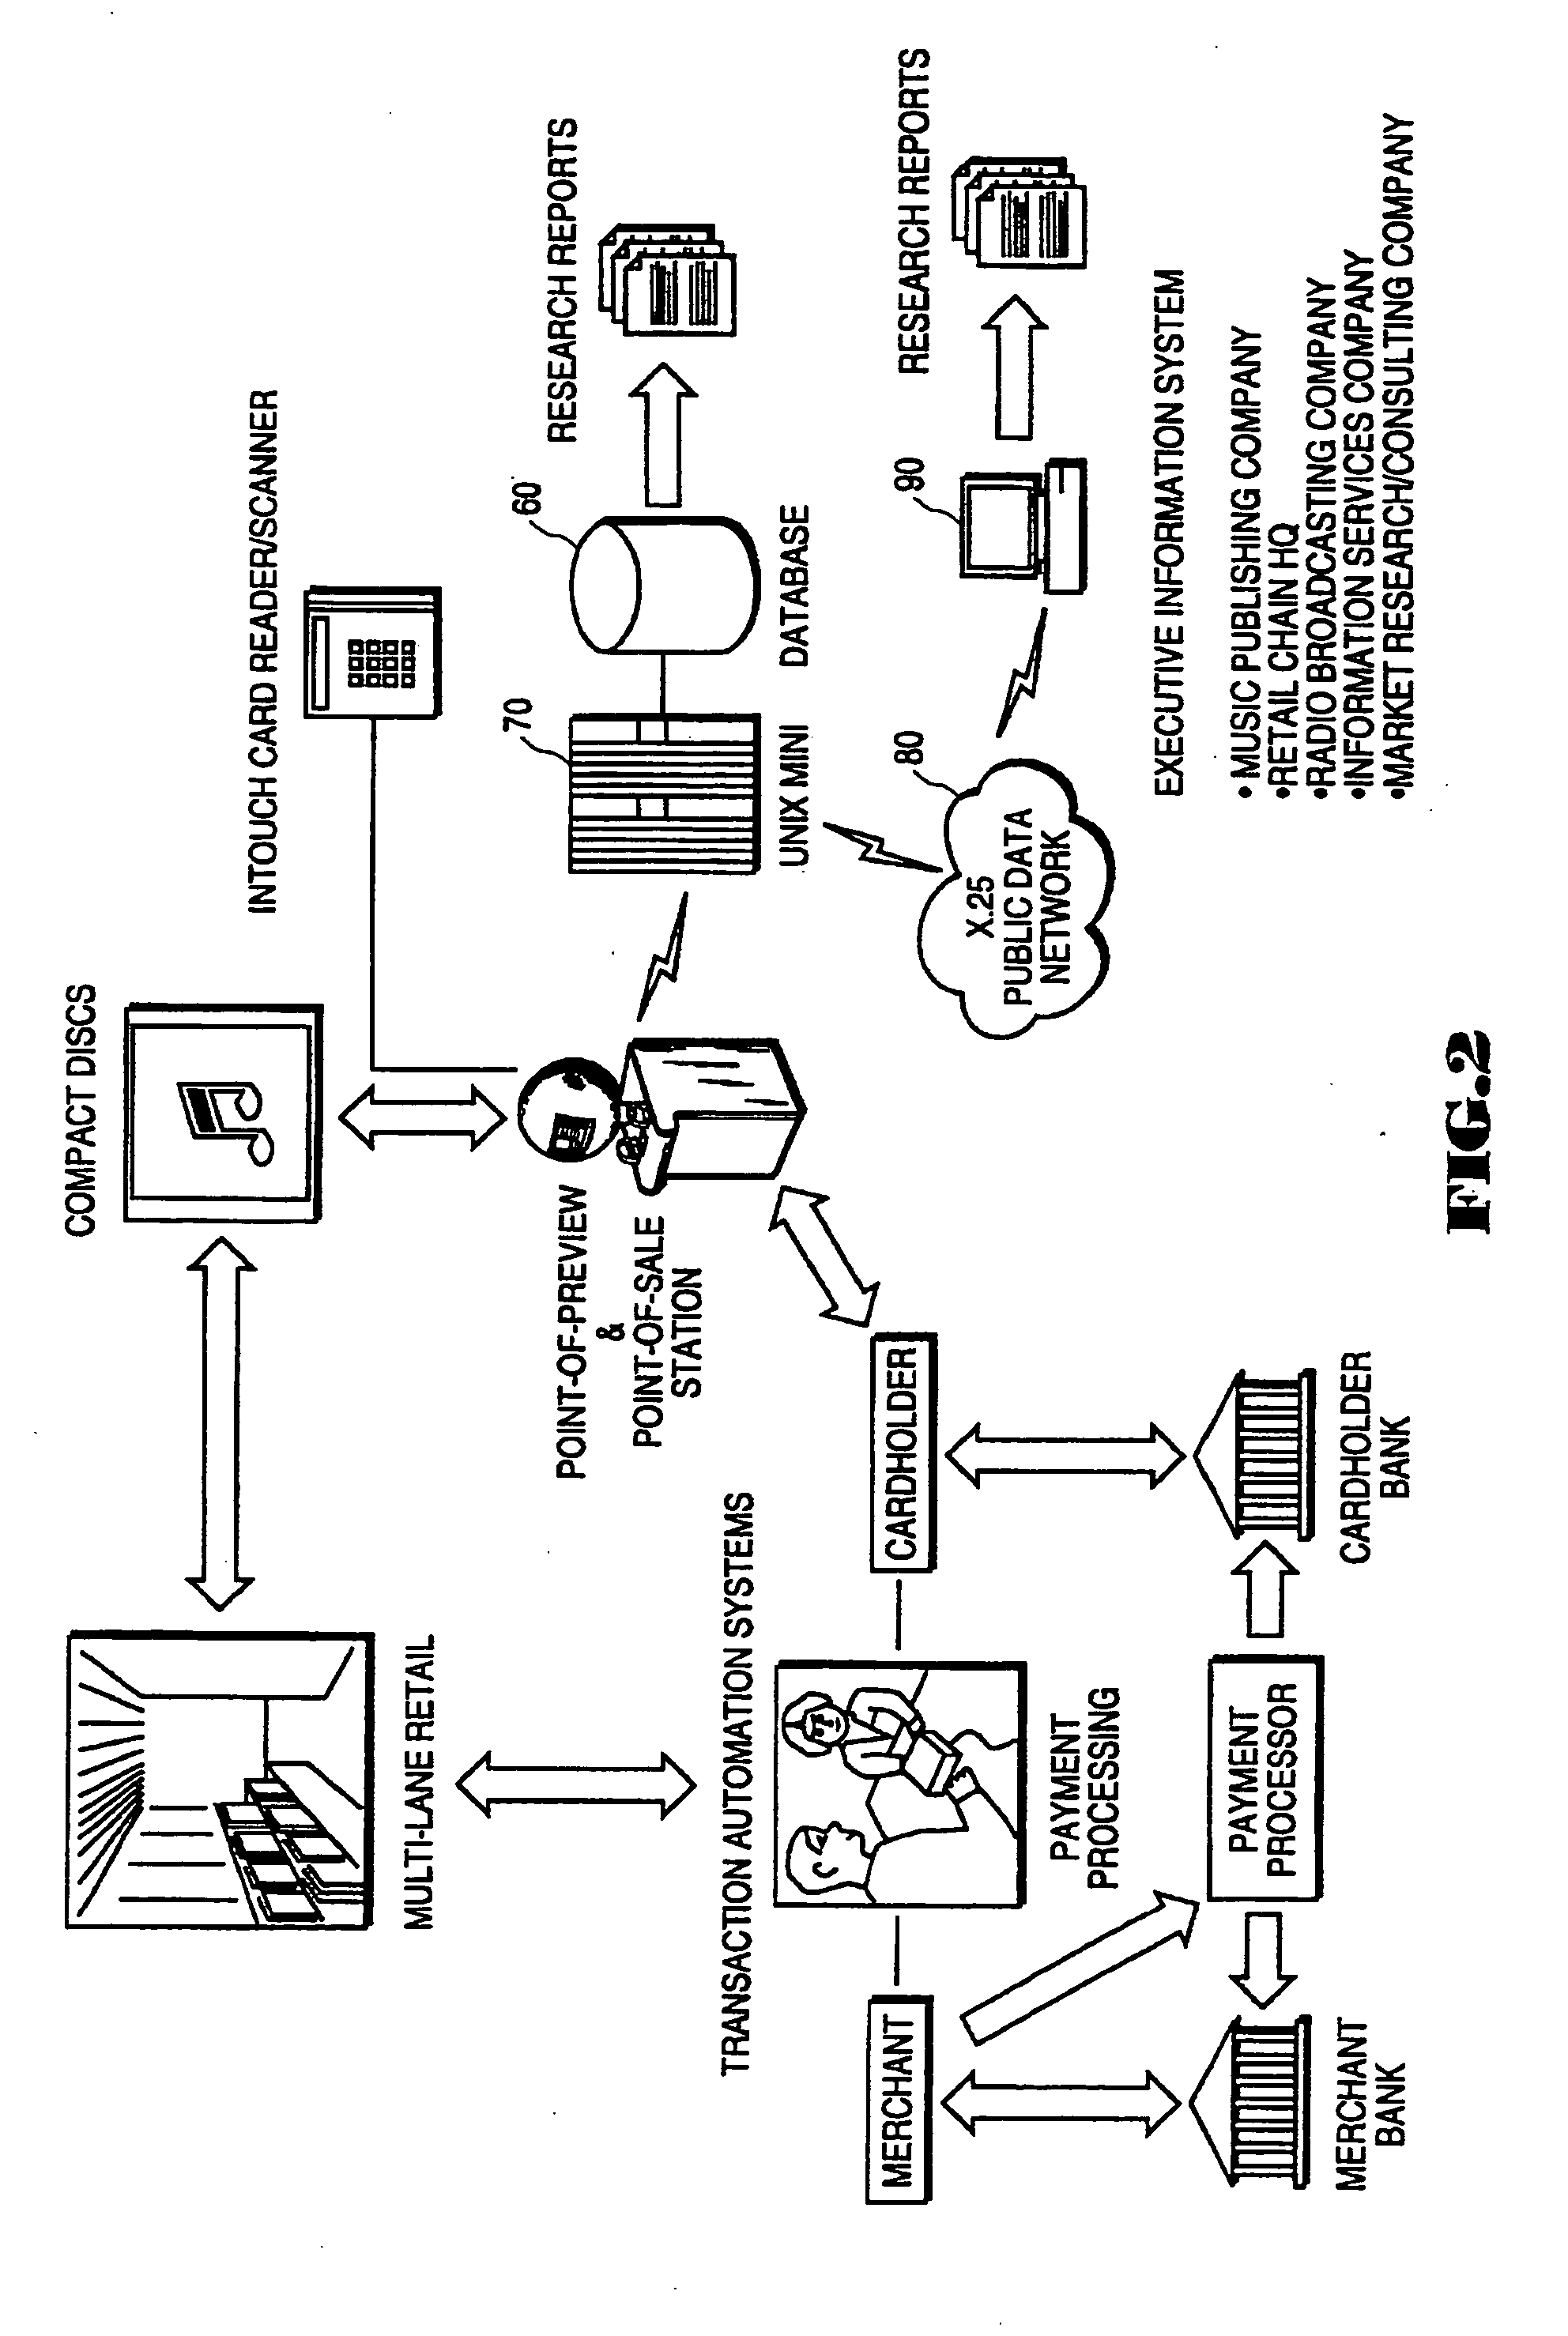 Network apparatus and method for preview of music products and compilation of market data